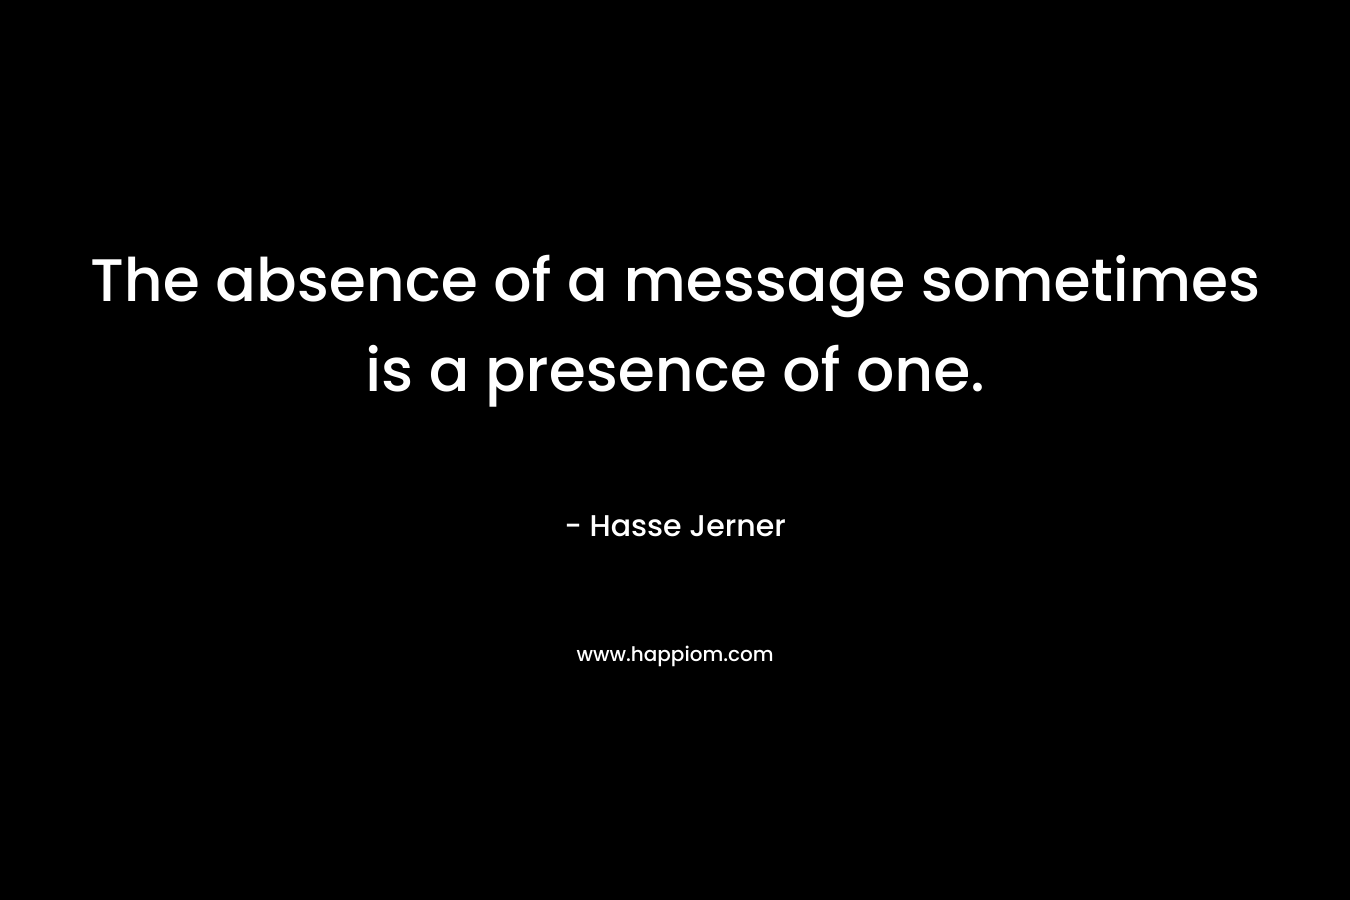 The absence of a message sometimes is a presence of one. – Hasse Jerner